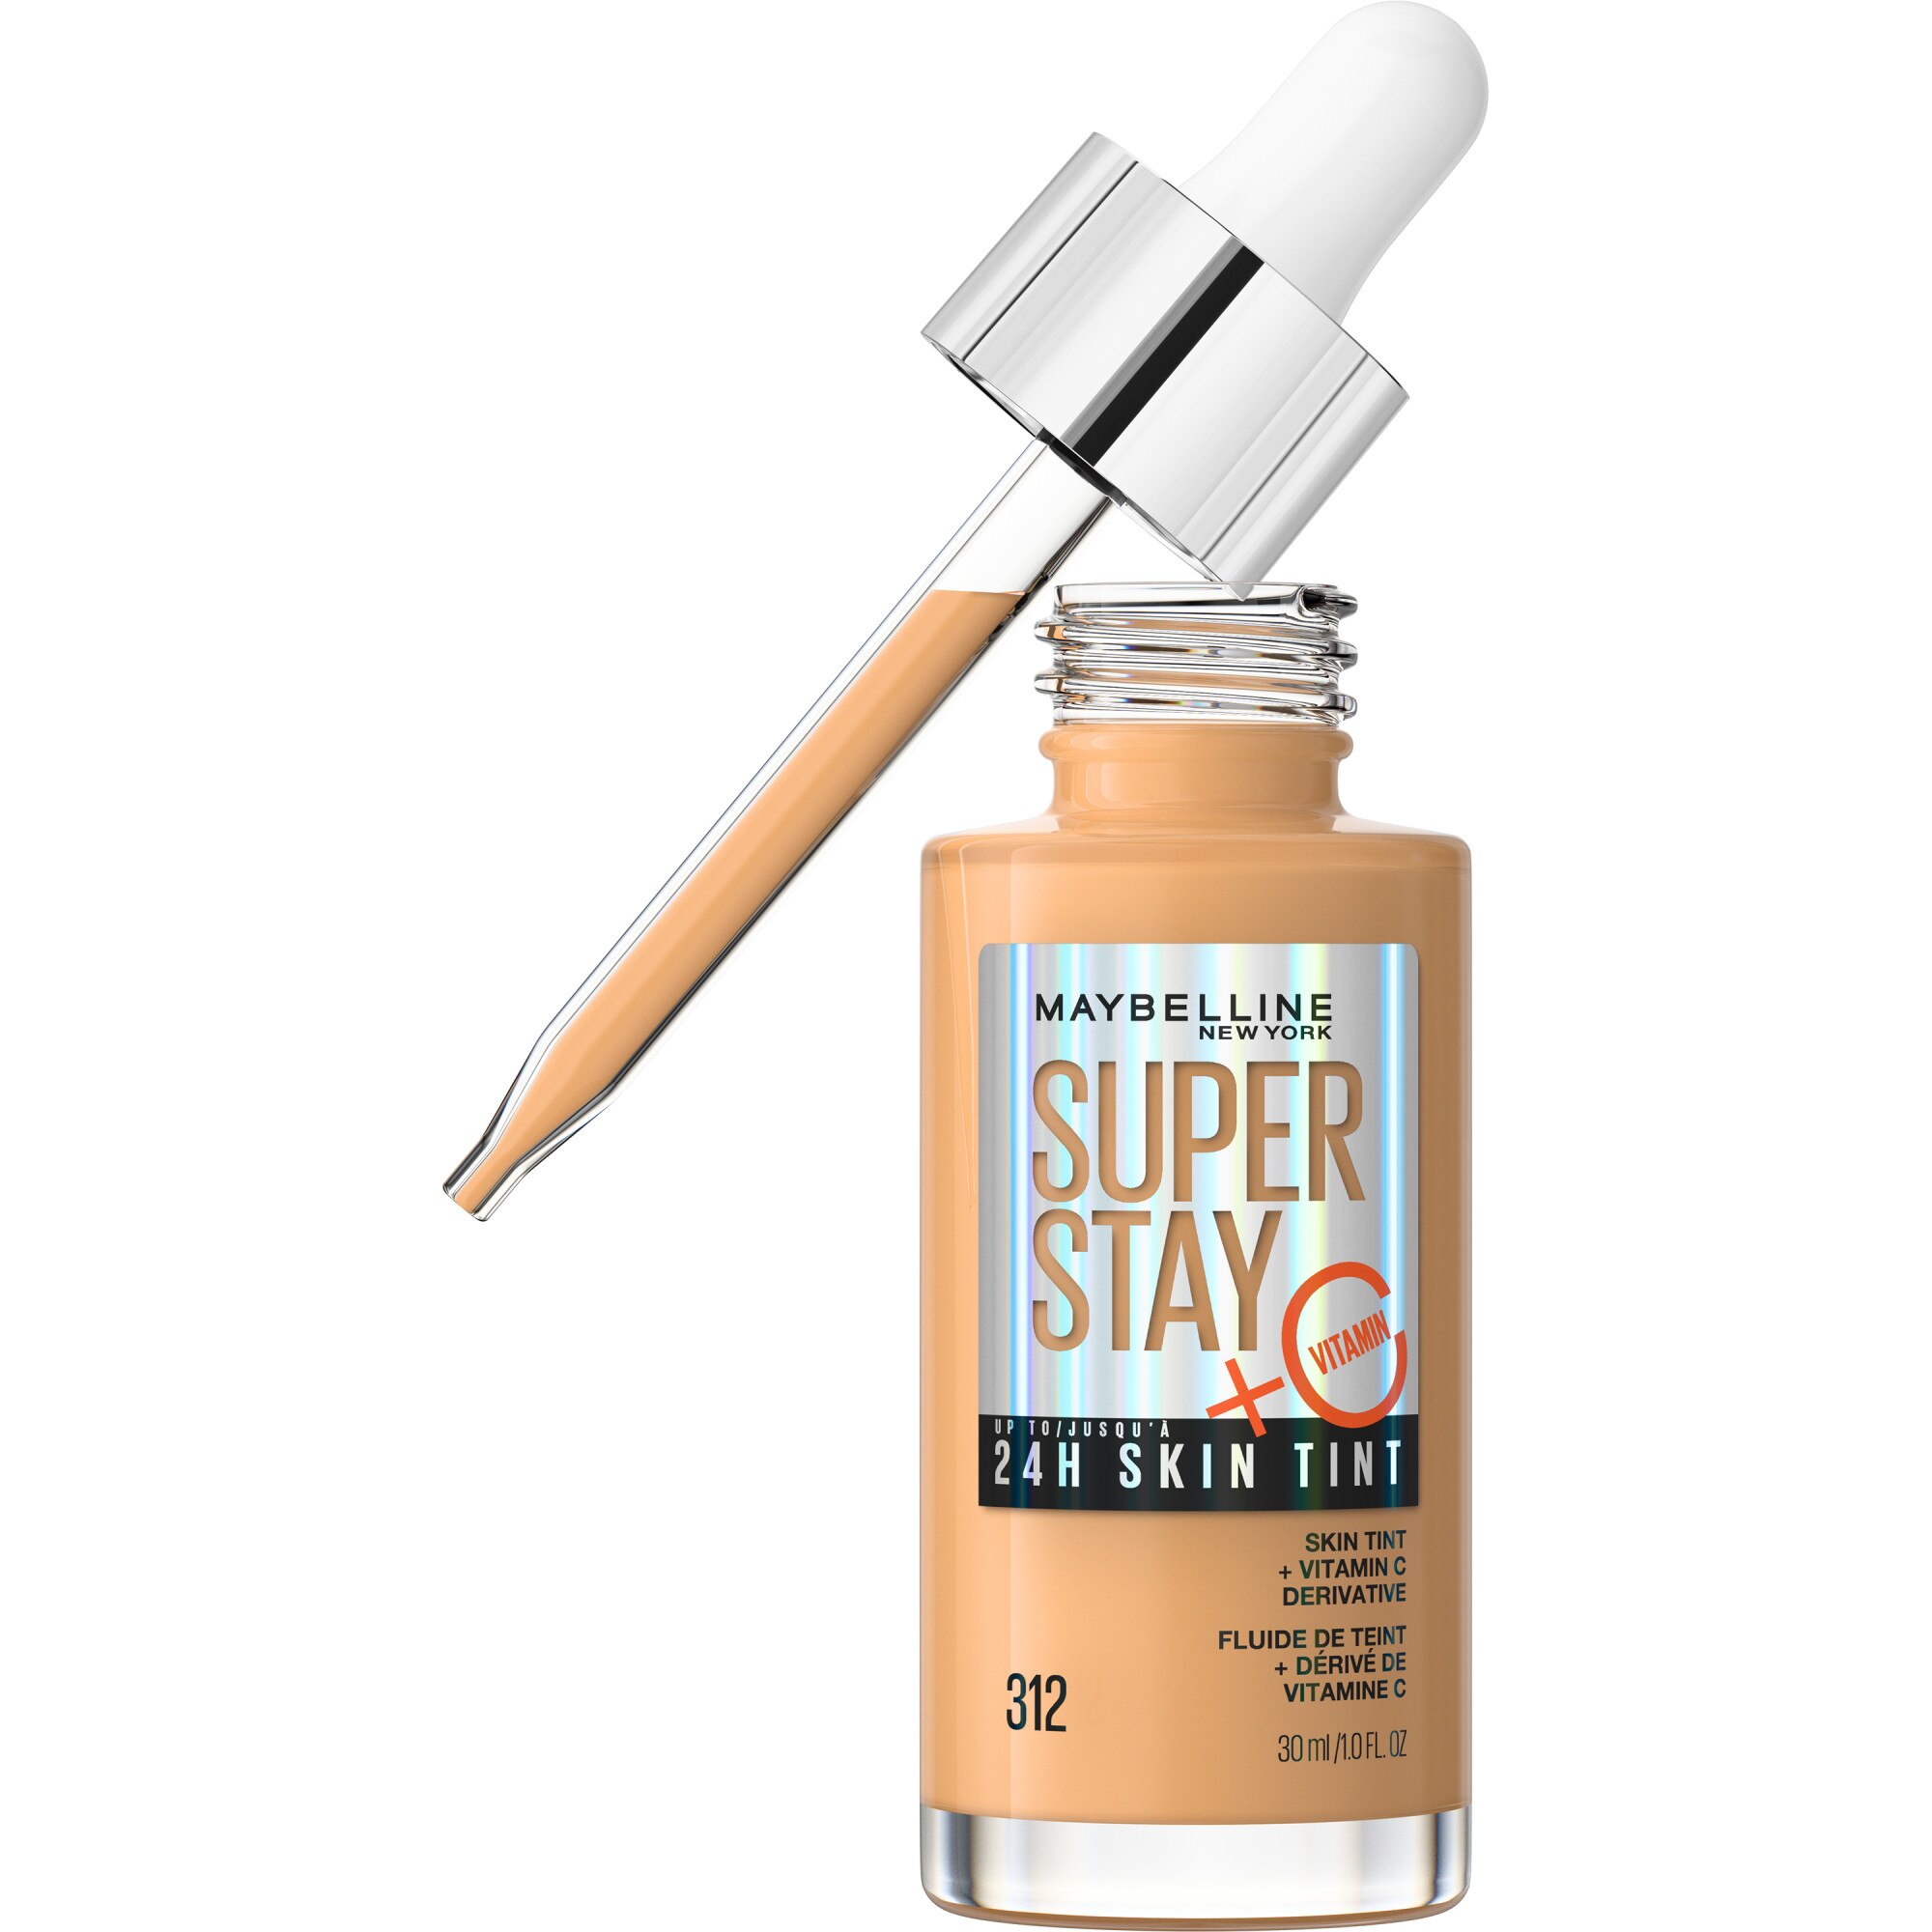 Maybelline New York Super Stay Up To 24HR Skin Tint With Vitamin C, 312, 1 Oz , CVS